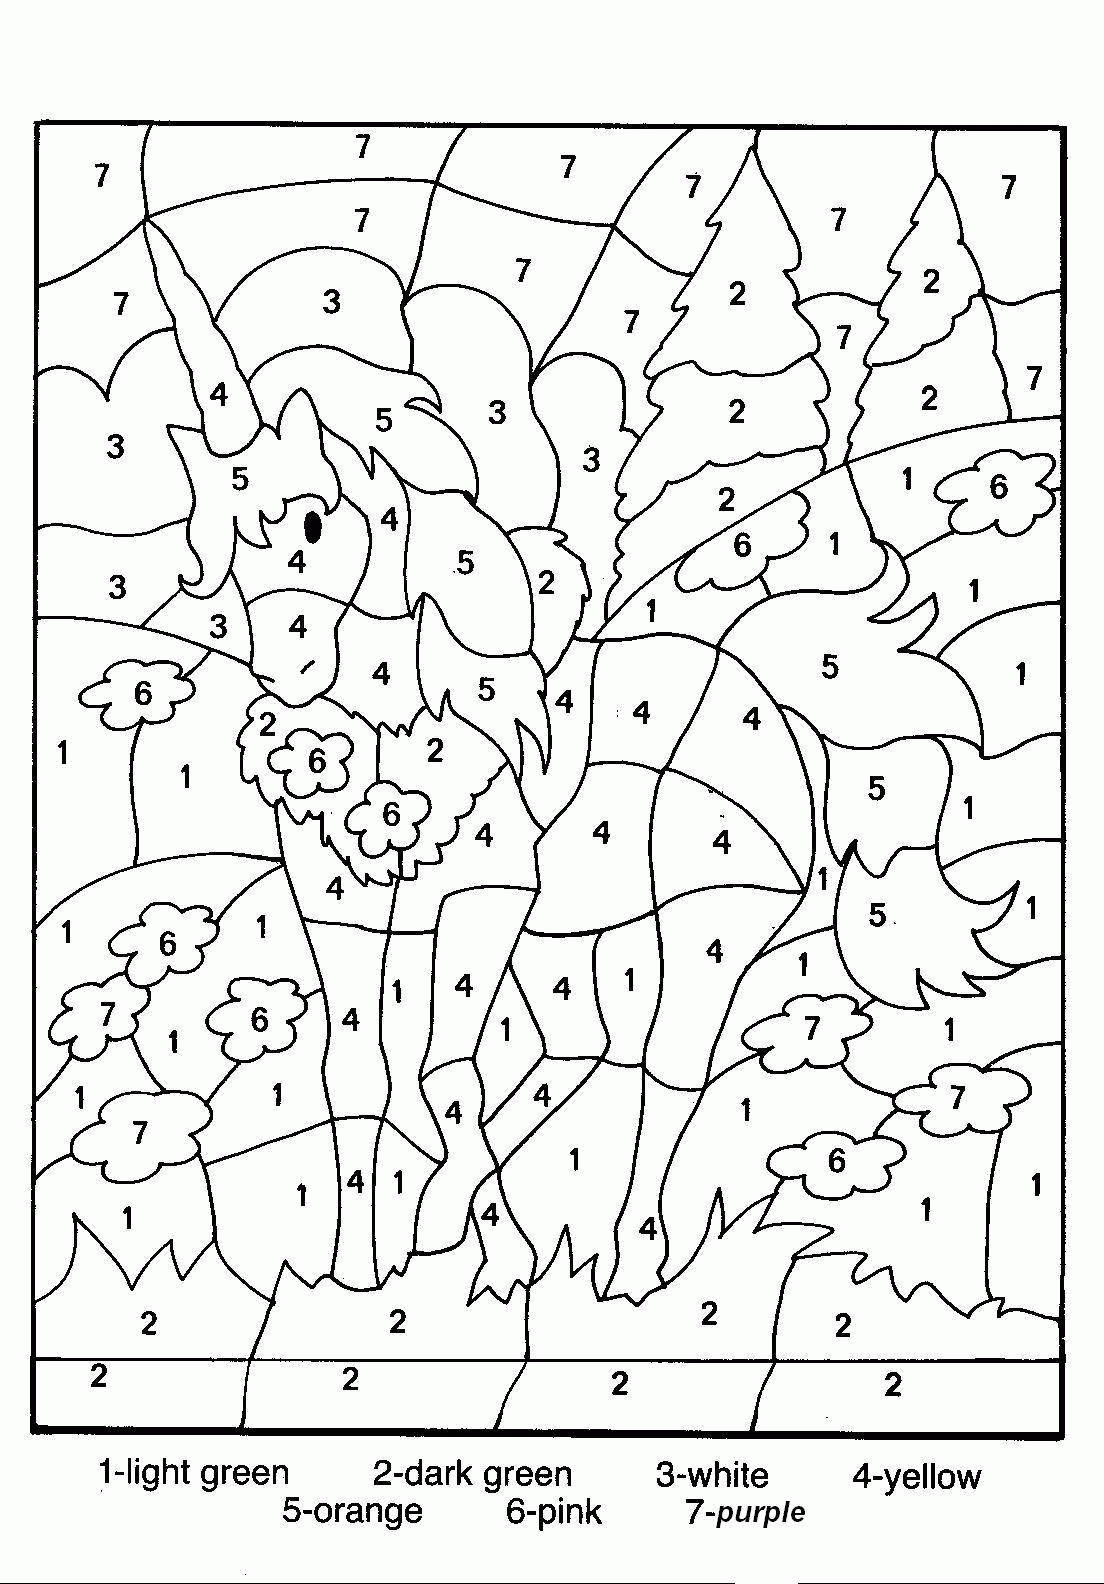 color-by-number-coloring-pages-for-adults-3.jpg